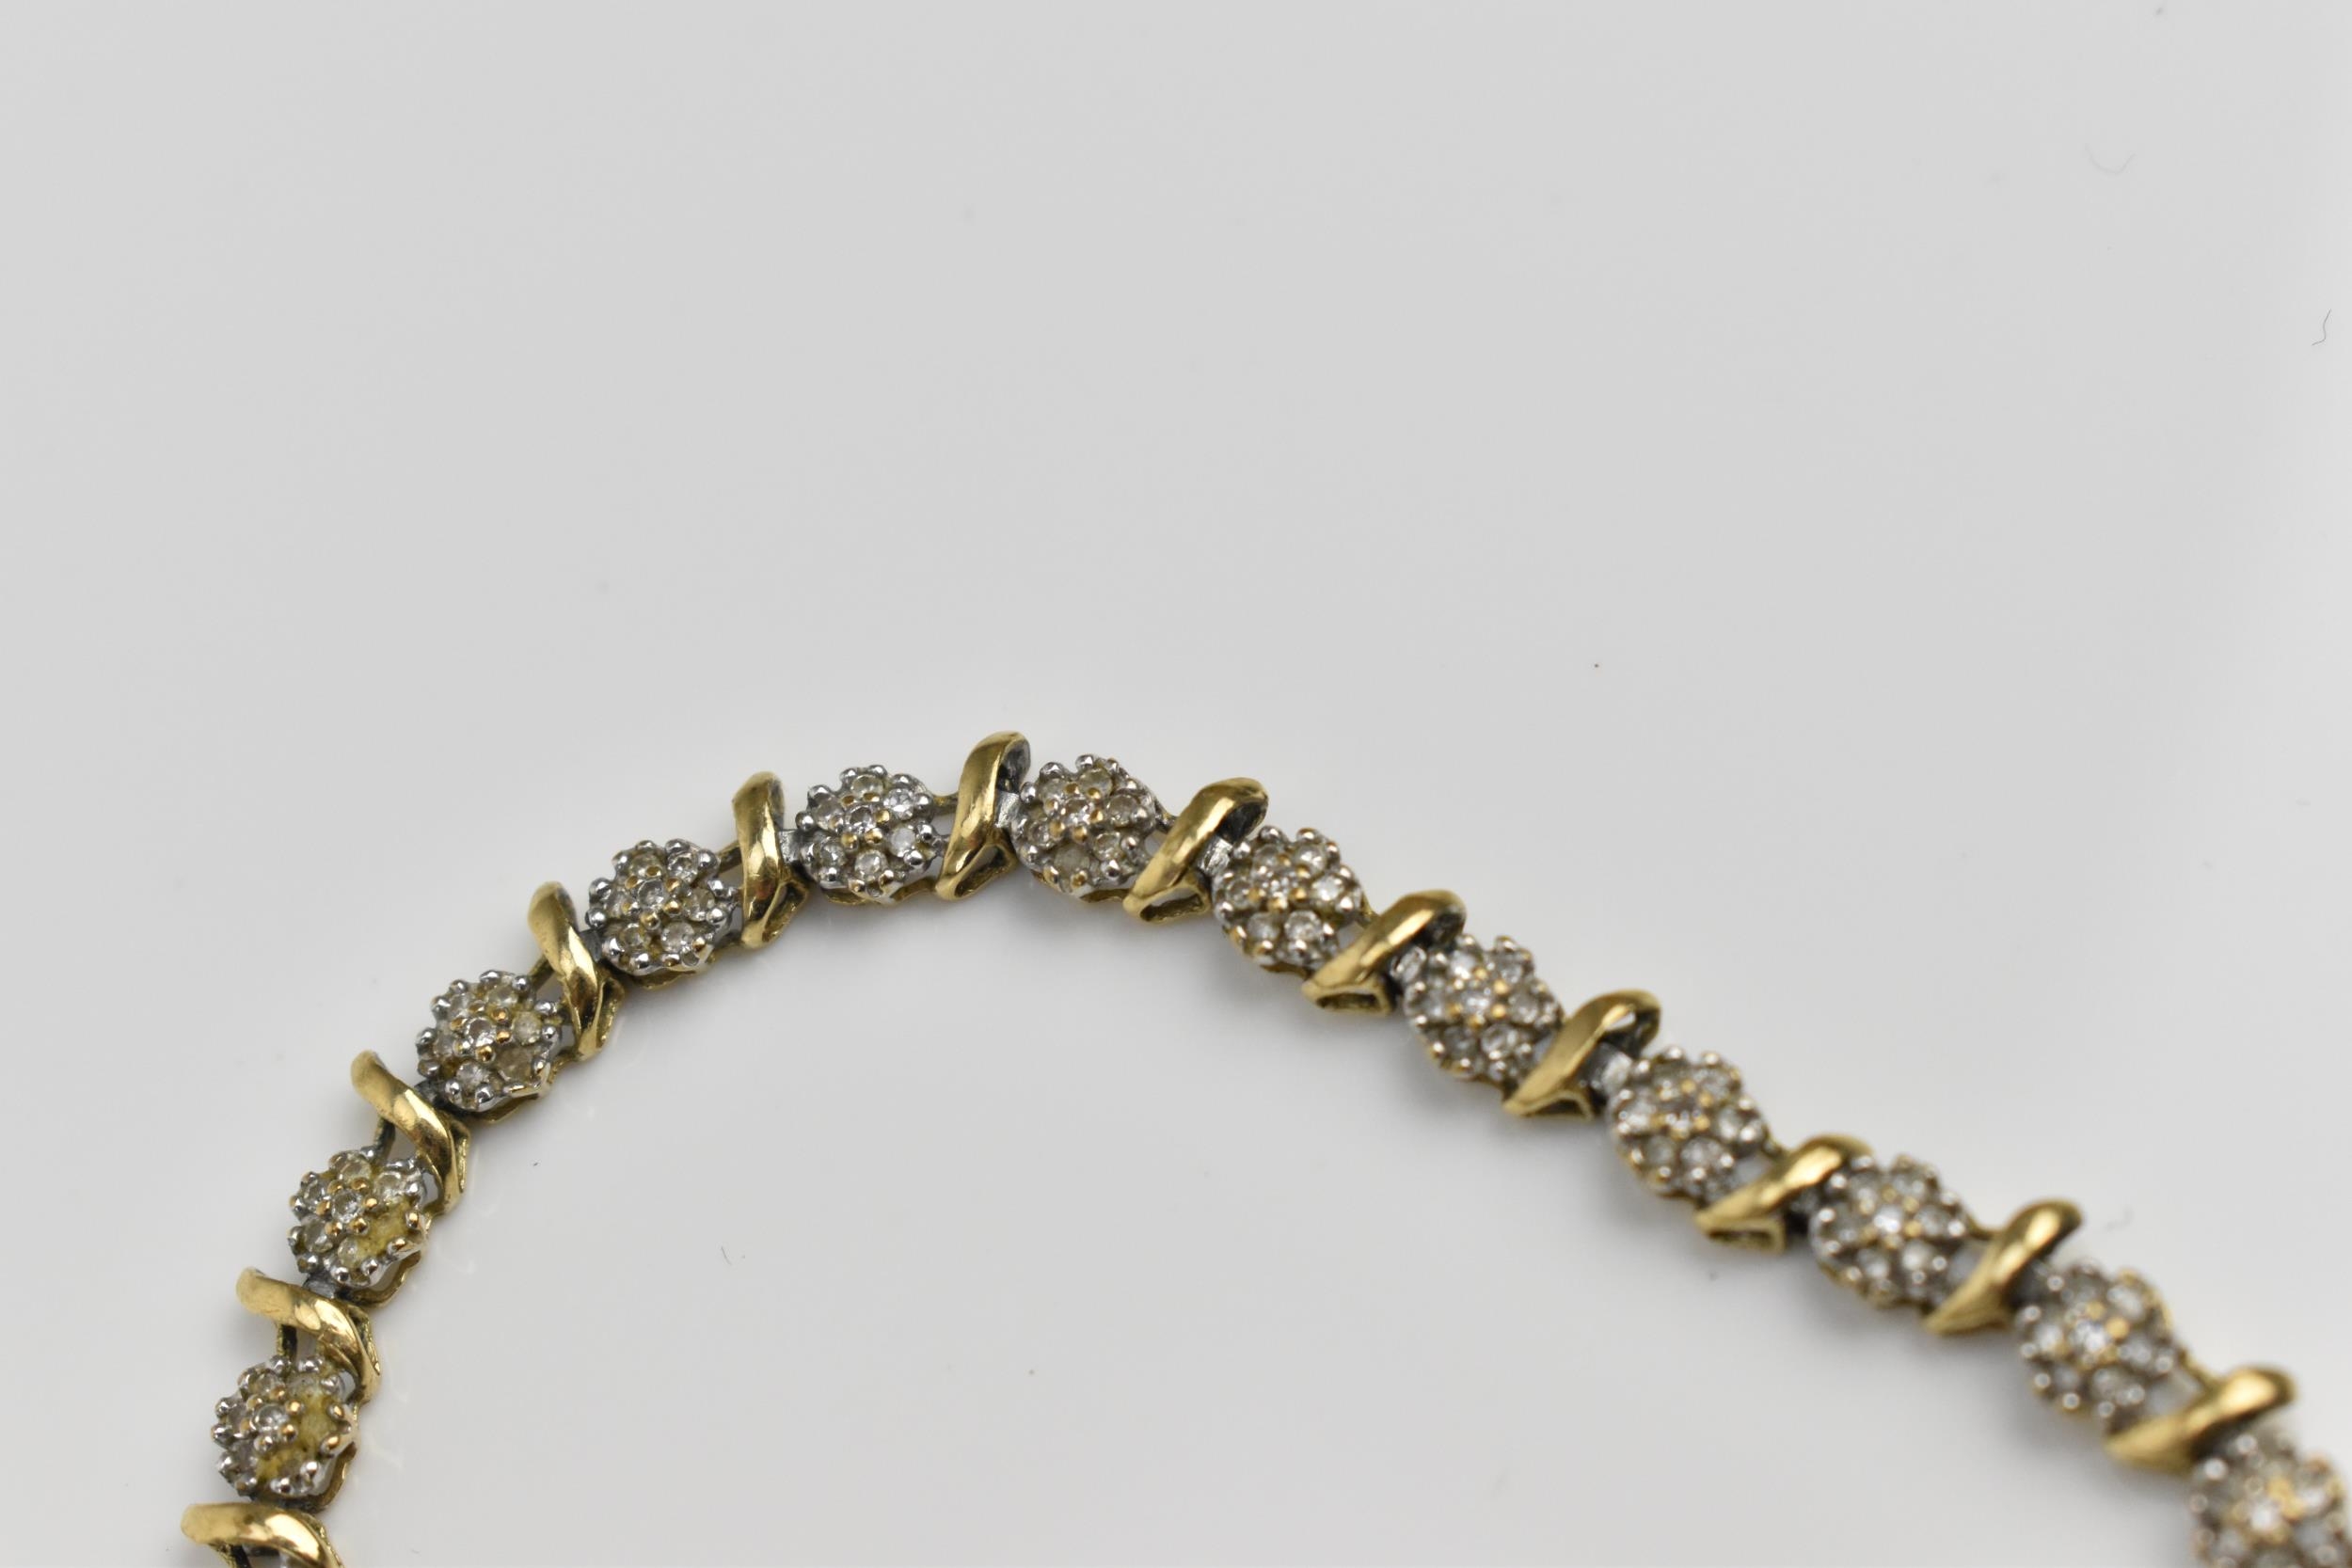 A 9ct yellow gold and diamond bracelet, designed with twenty-seven floral diamond clusters, with - Image 4 of 7